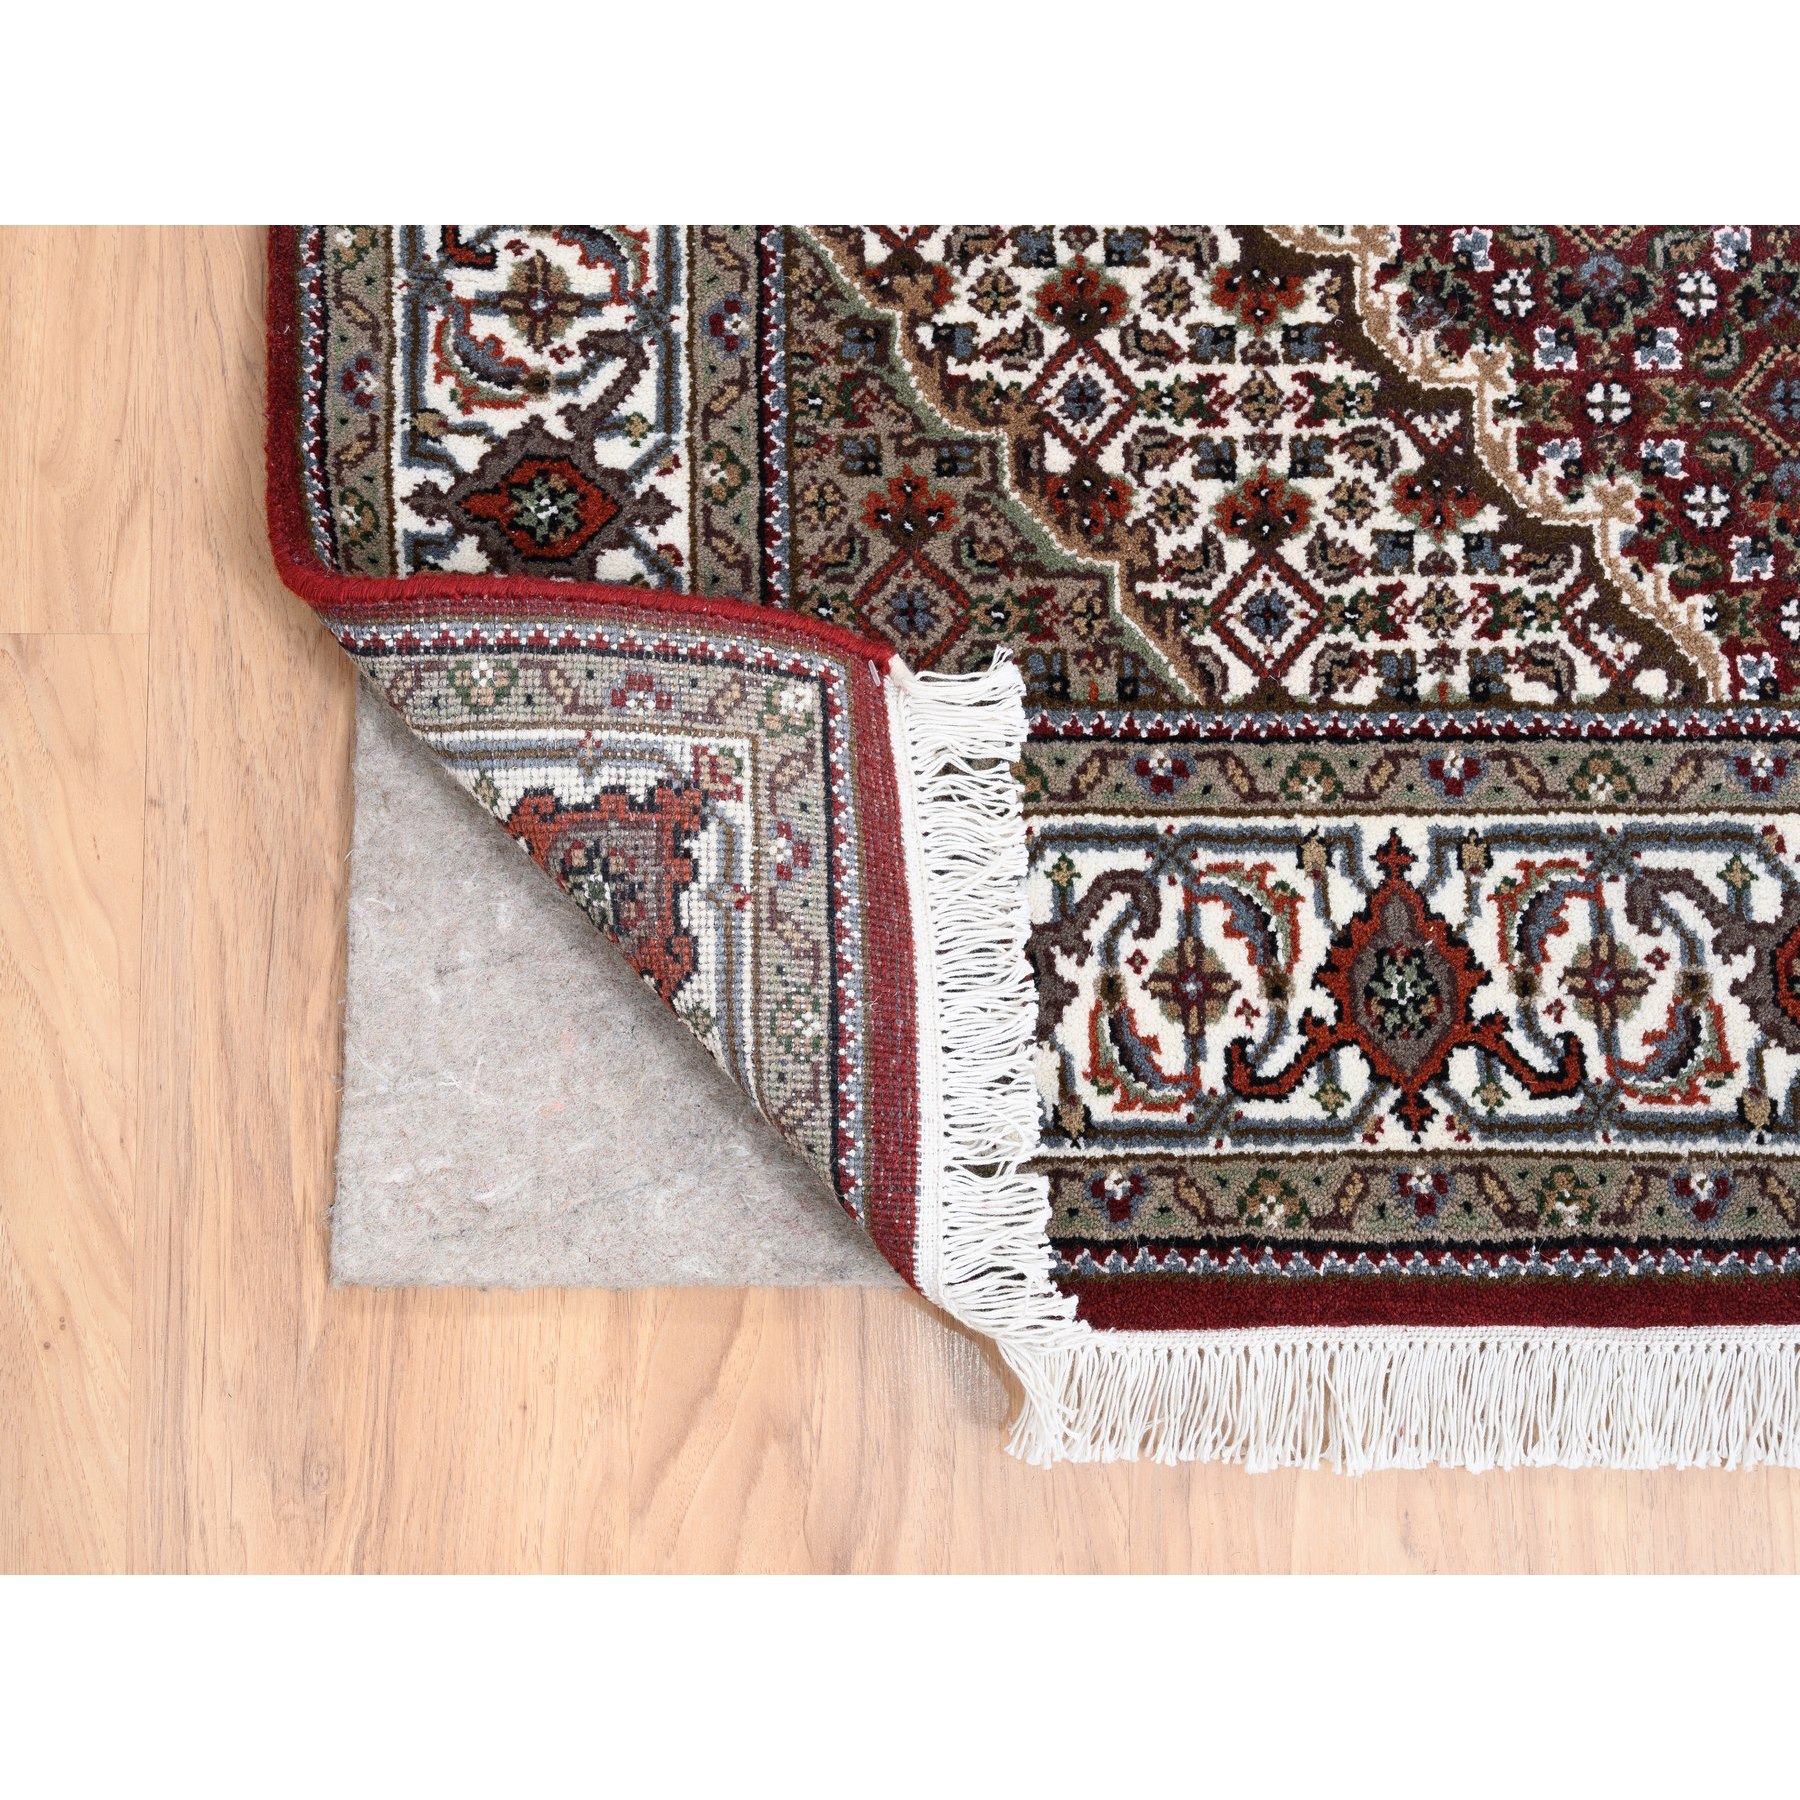 4'1"x16' Red Tabriz Mahi with Fish Medallions Design Wool and Silk Hand Woven Oriental Wide XL Runner Rug 